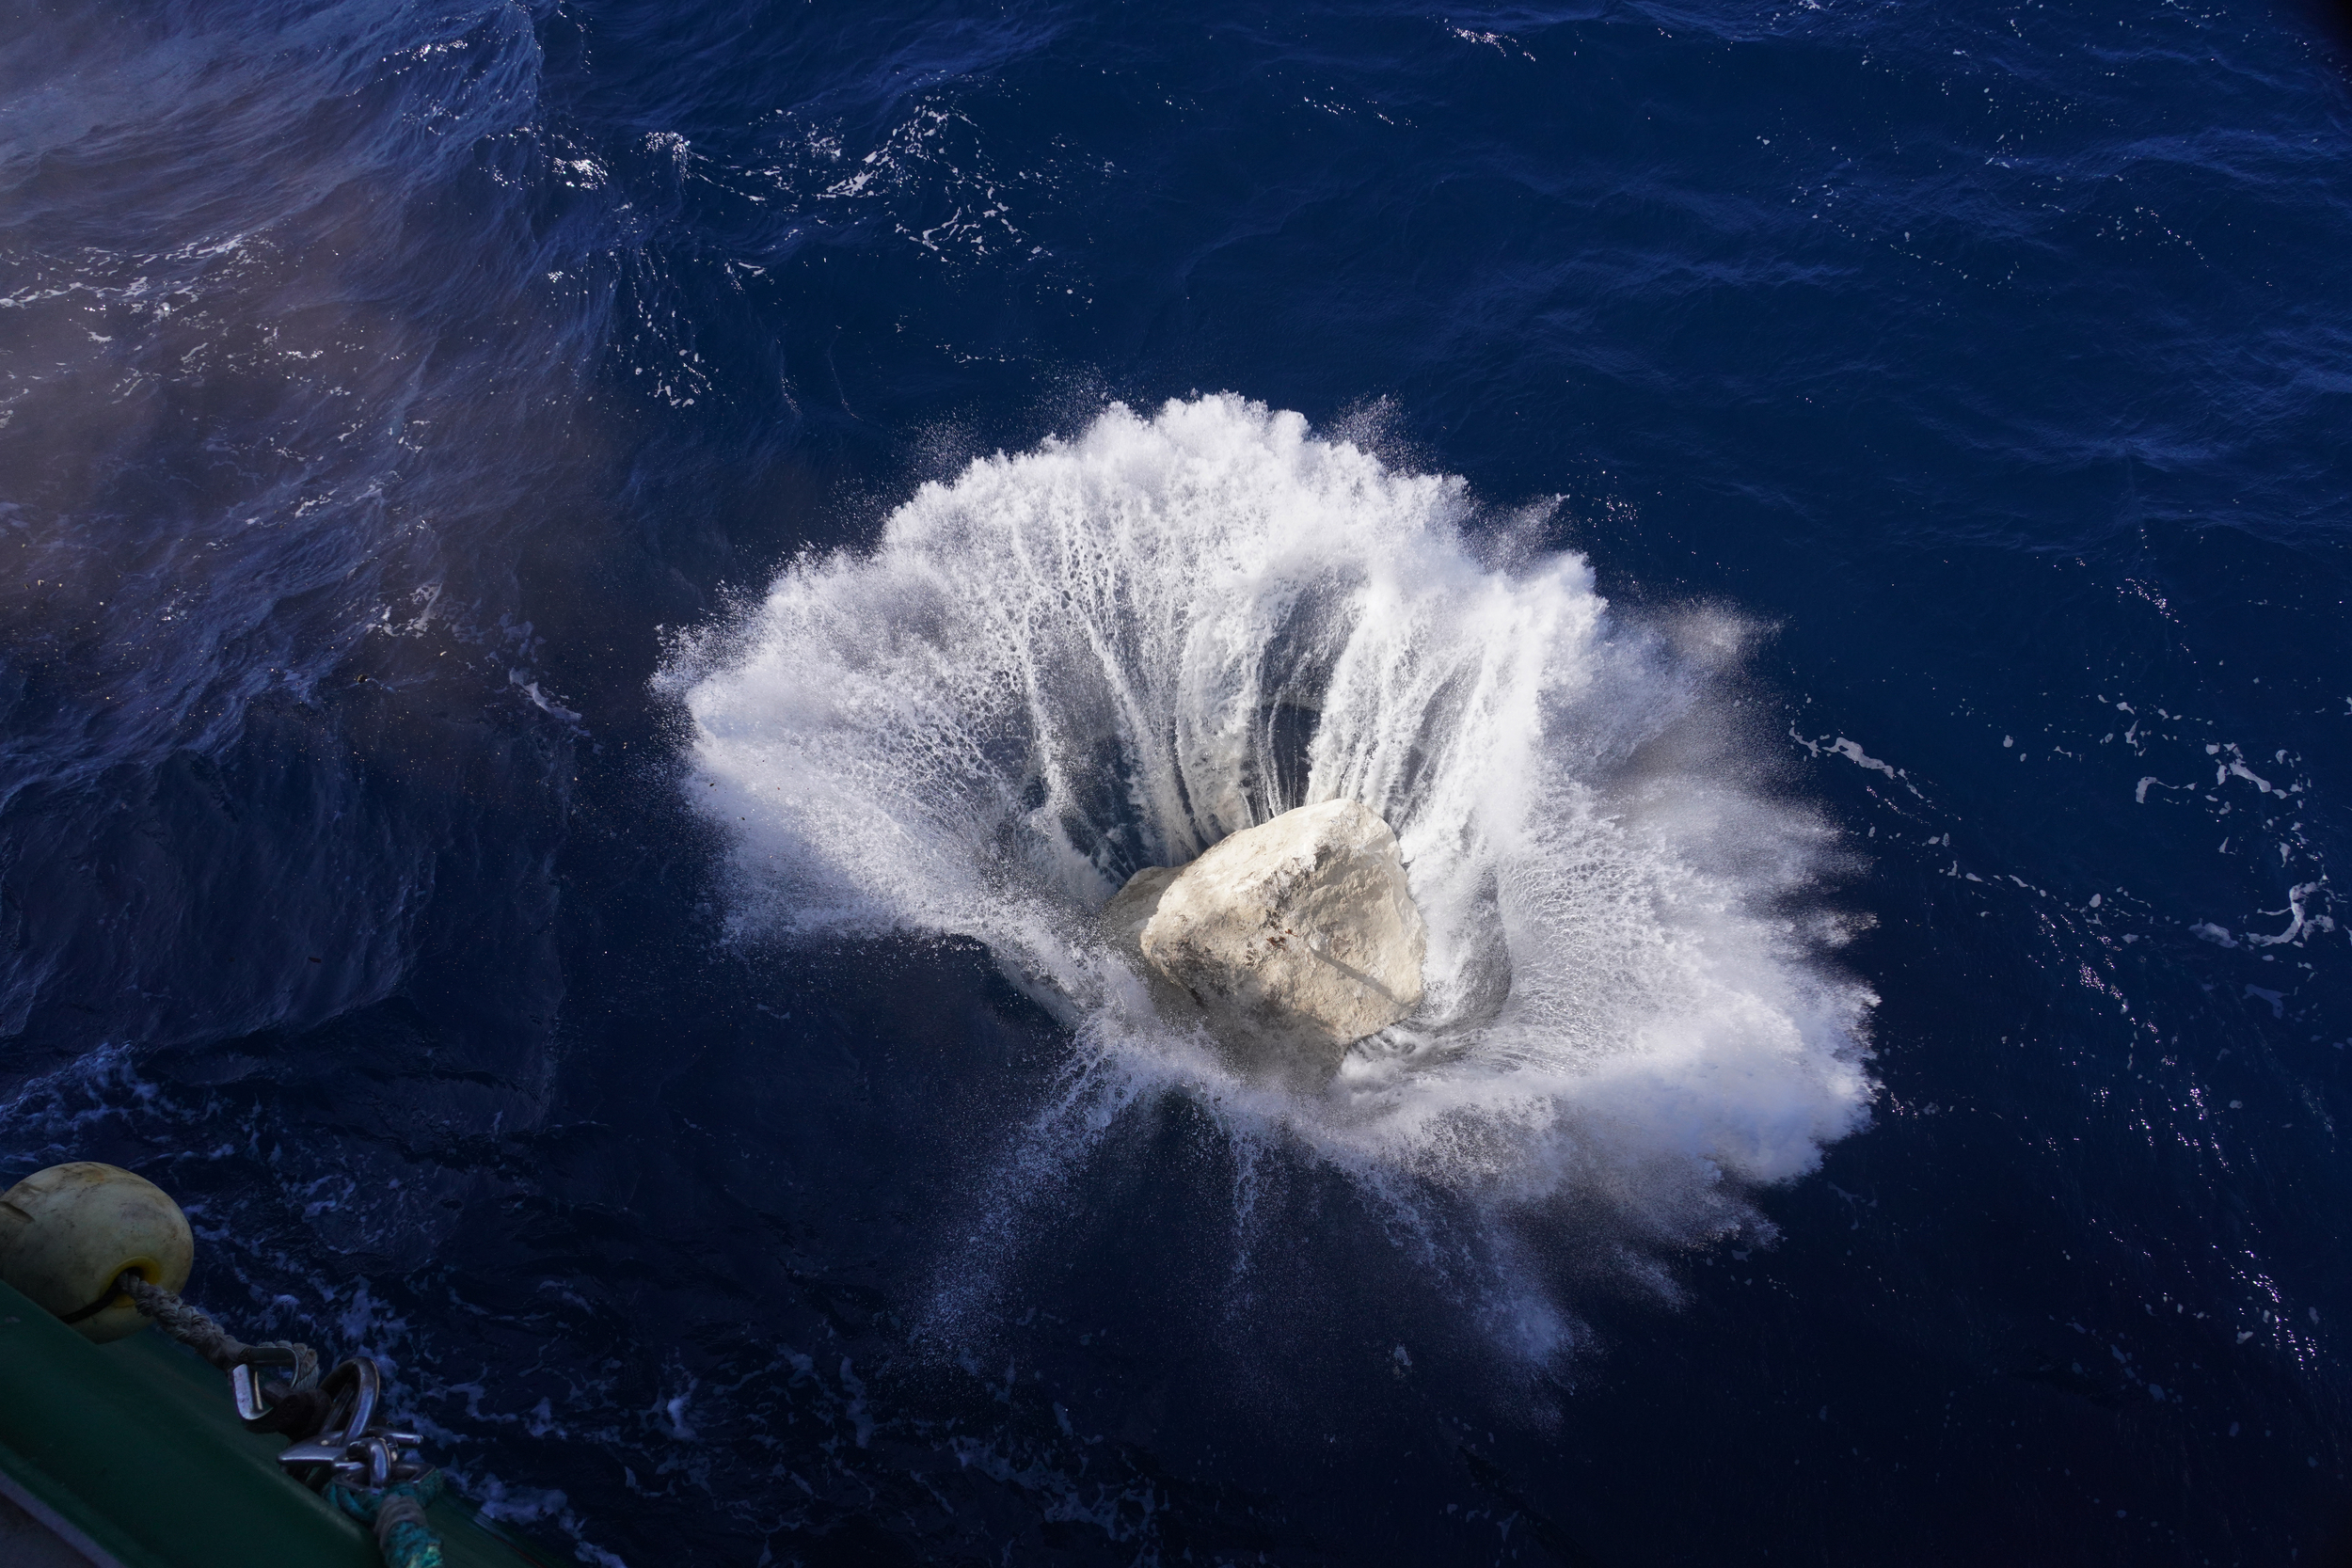 The moment a large rock splashes into deep blue water, with a large spray as the boulder is last seen before it submerges